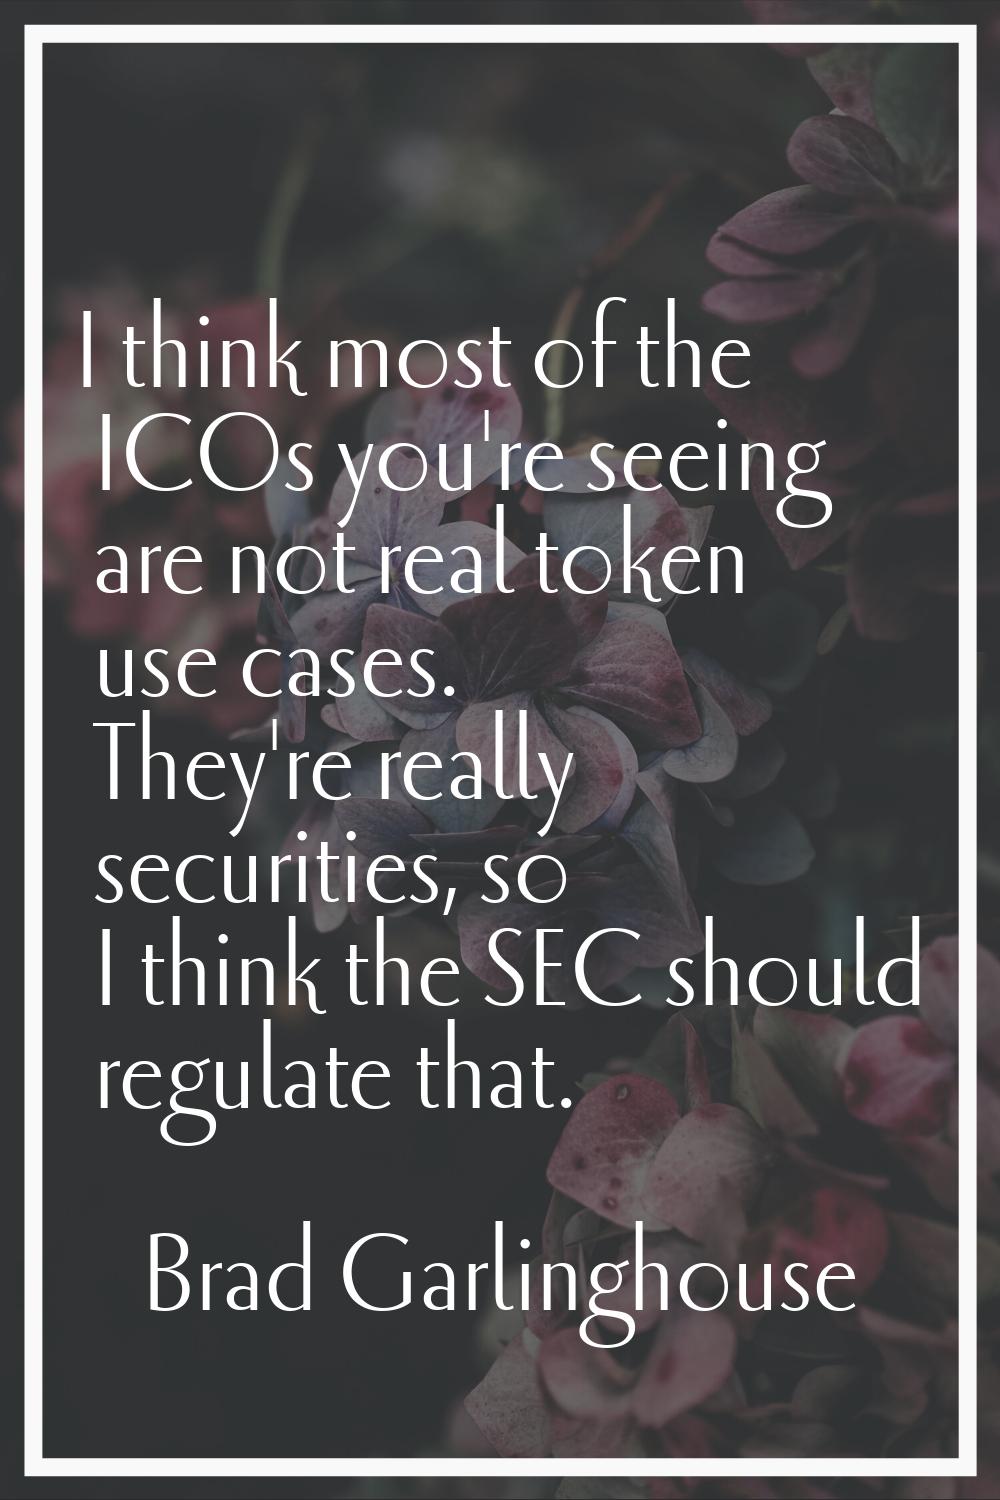 I think most of the ICOs you're seeing are not real token use cases. They're really securities, so 